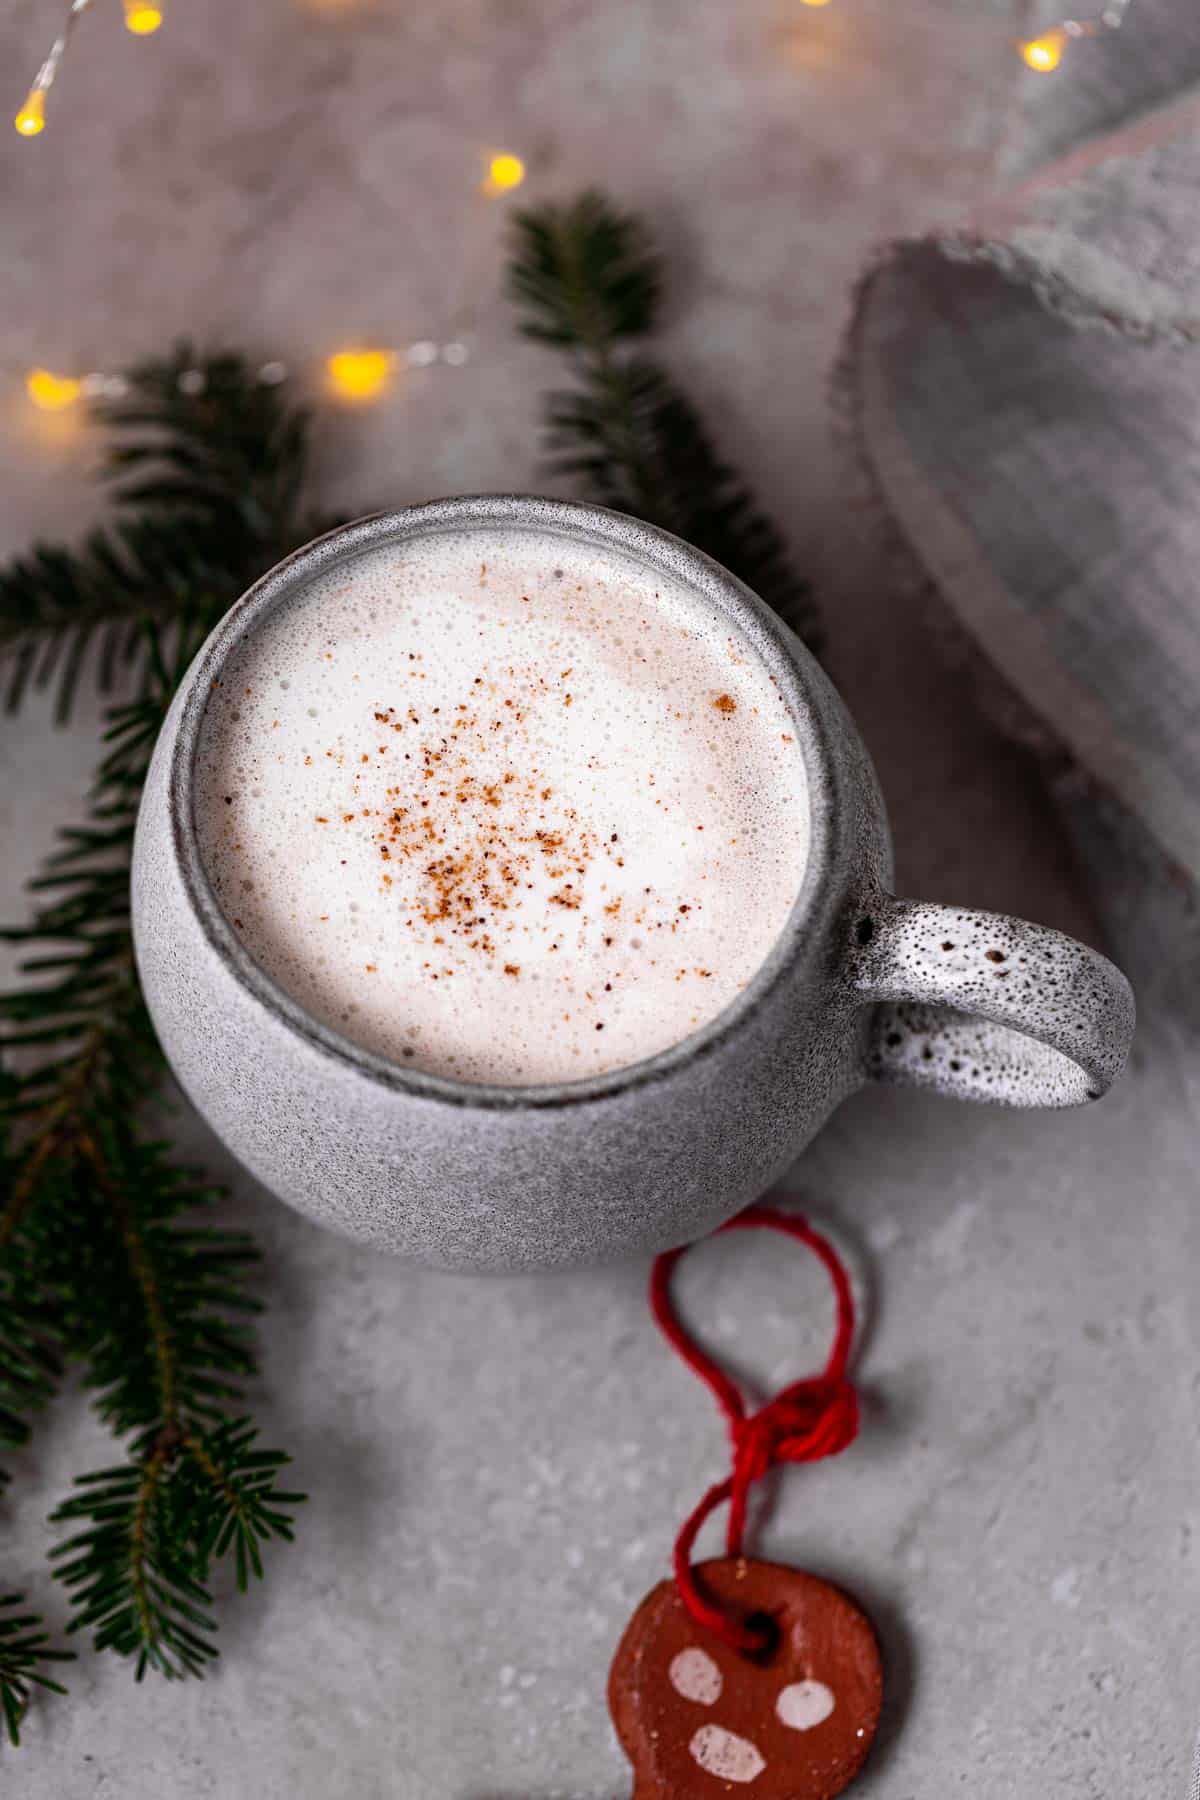 A large mug of dairy-free eggnog topped with whipped cream and nutmeg, surrounded by lights, branches, and a gingerbread ornament.